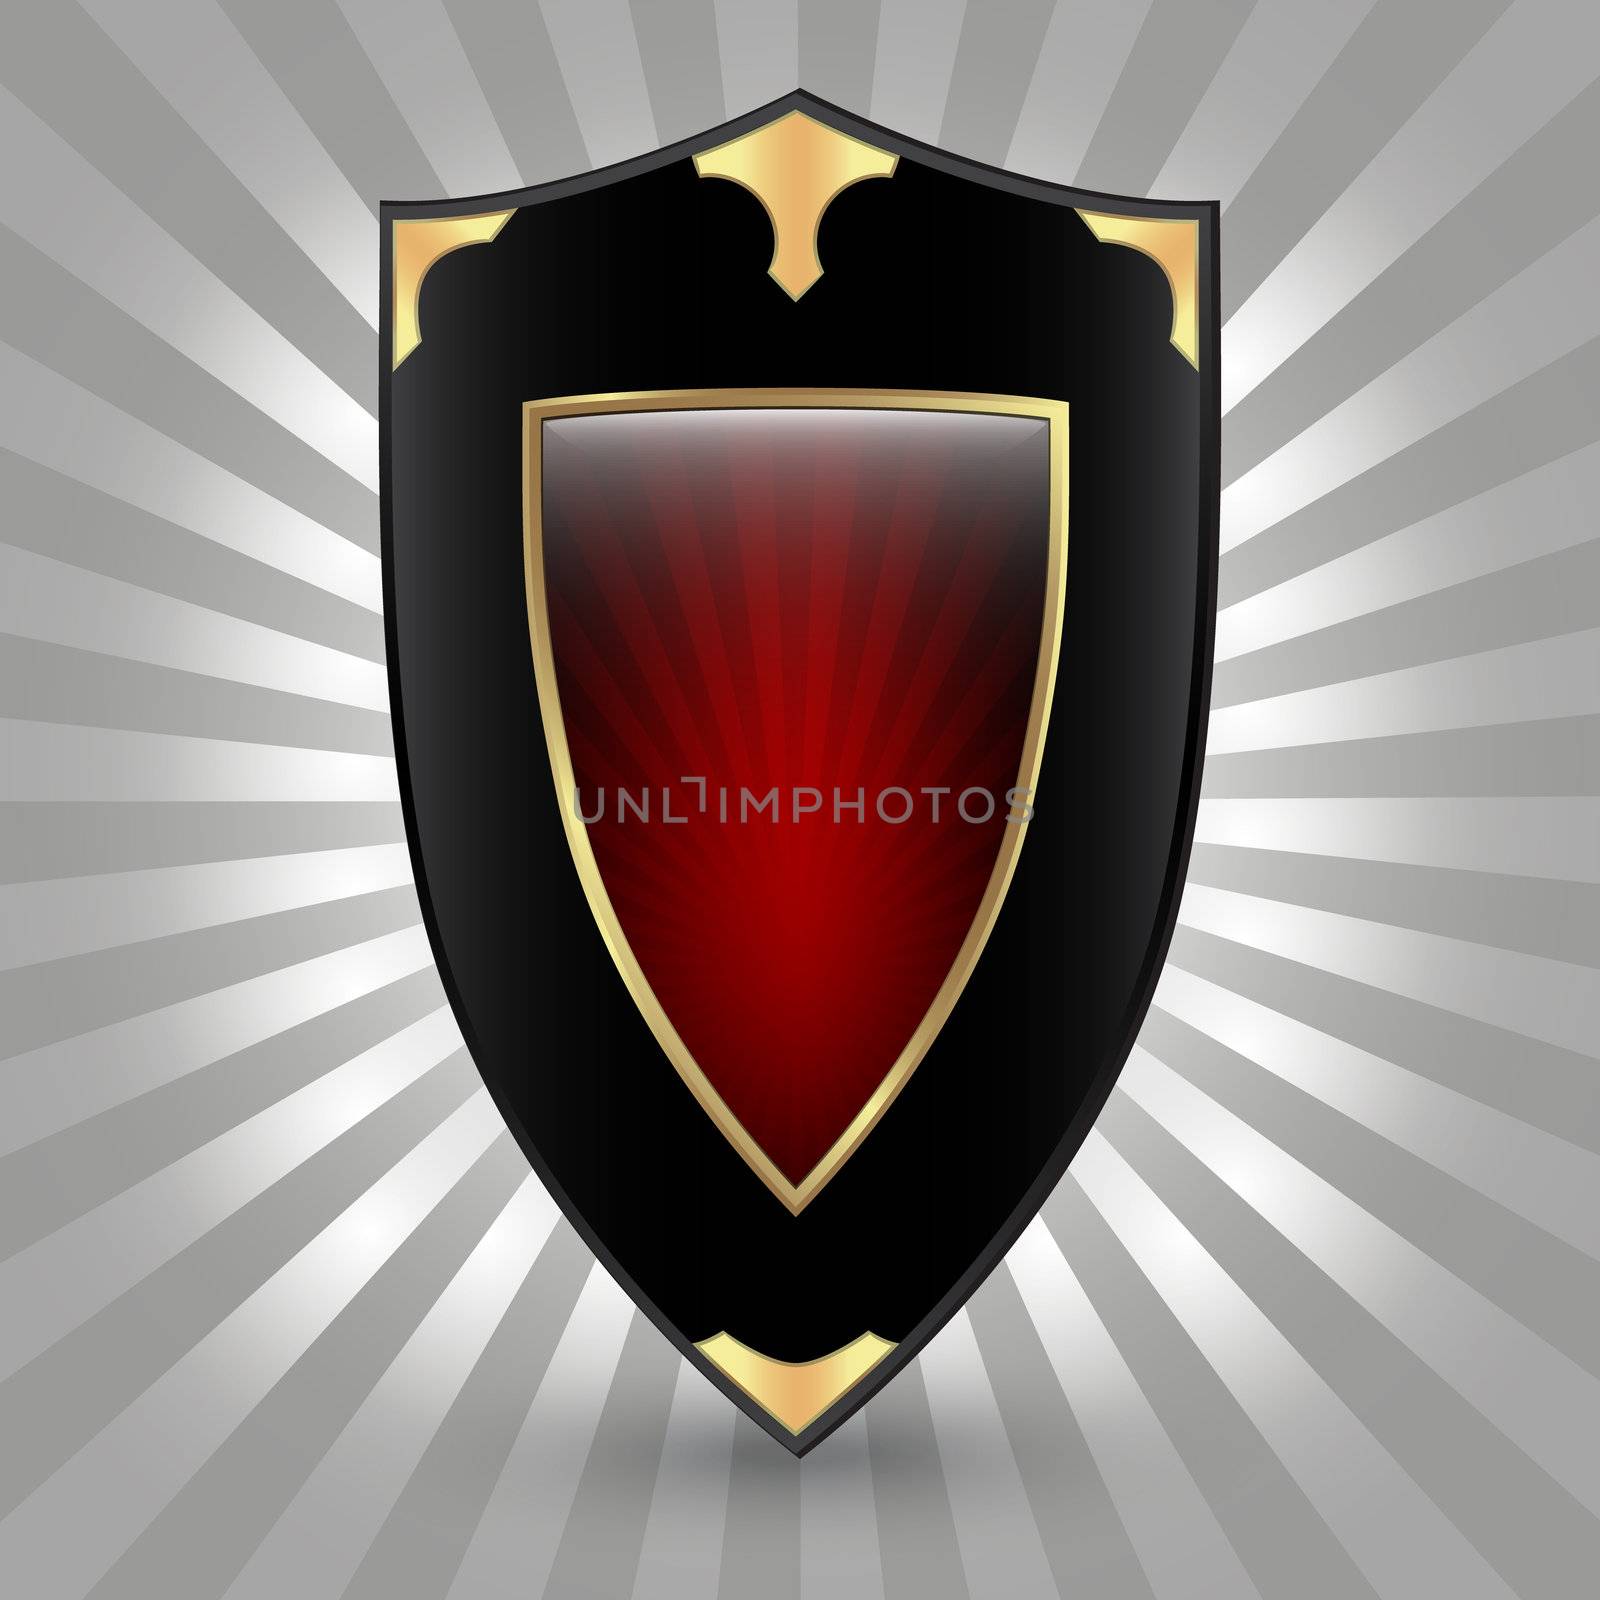 Illustration of shield inspired by historic shields